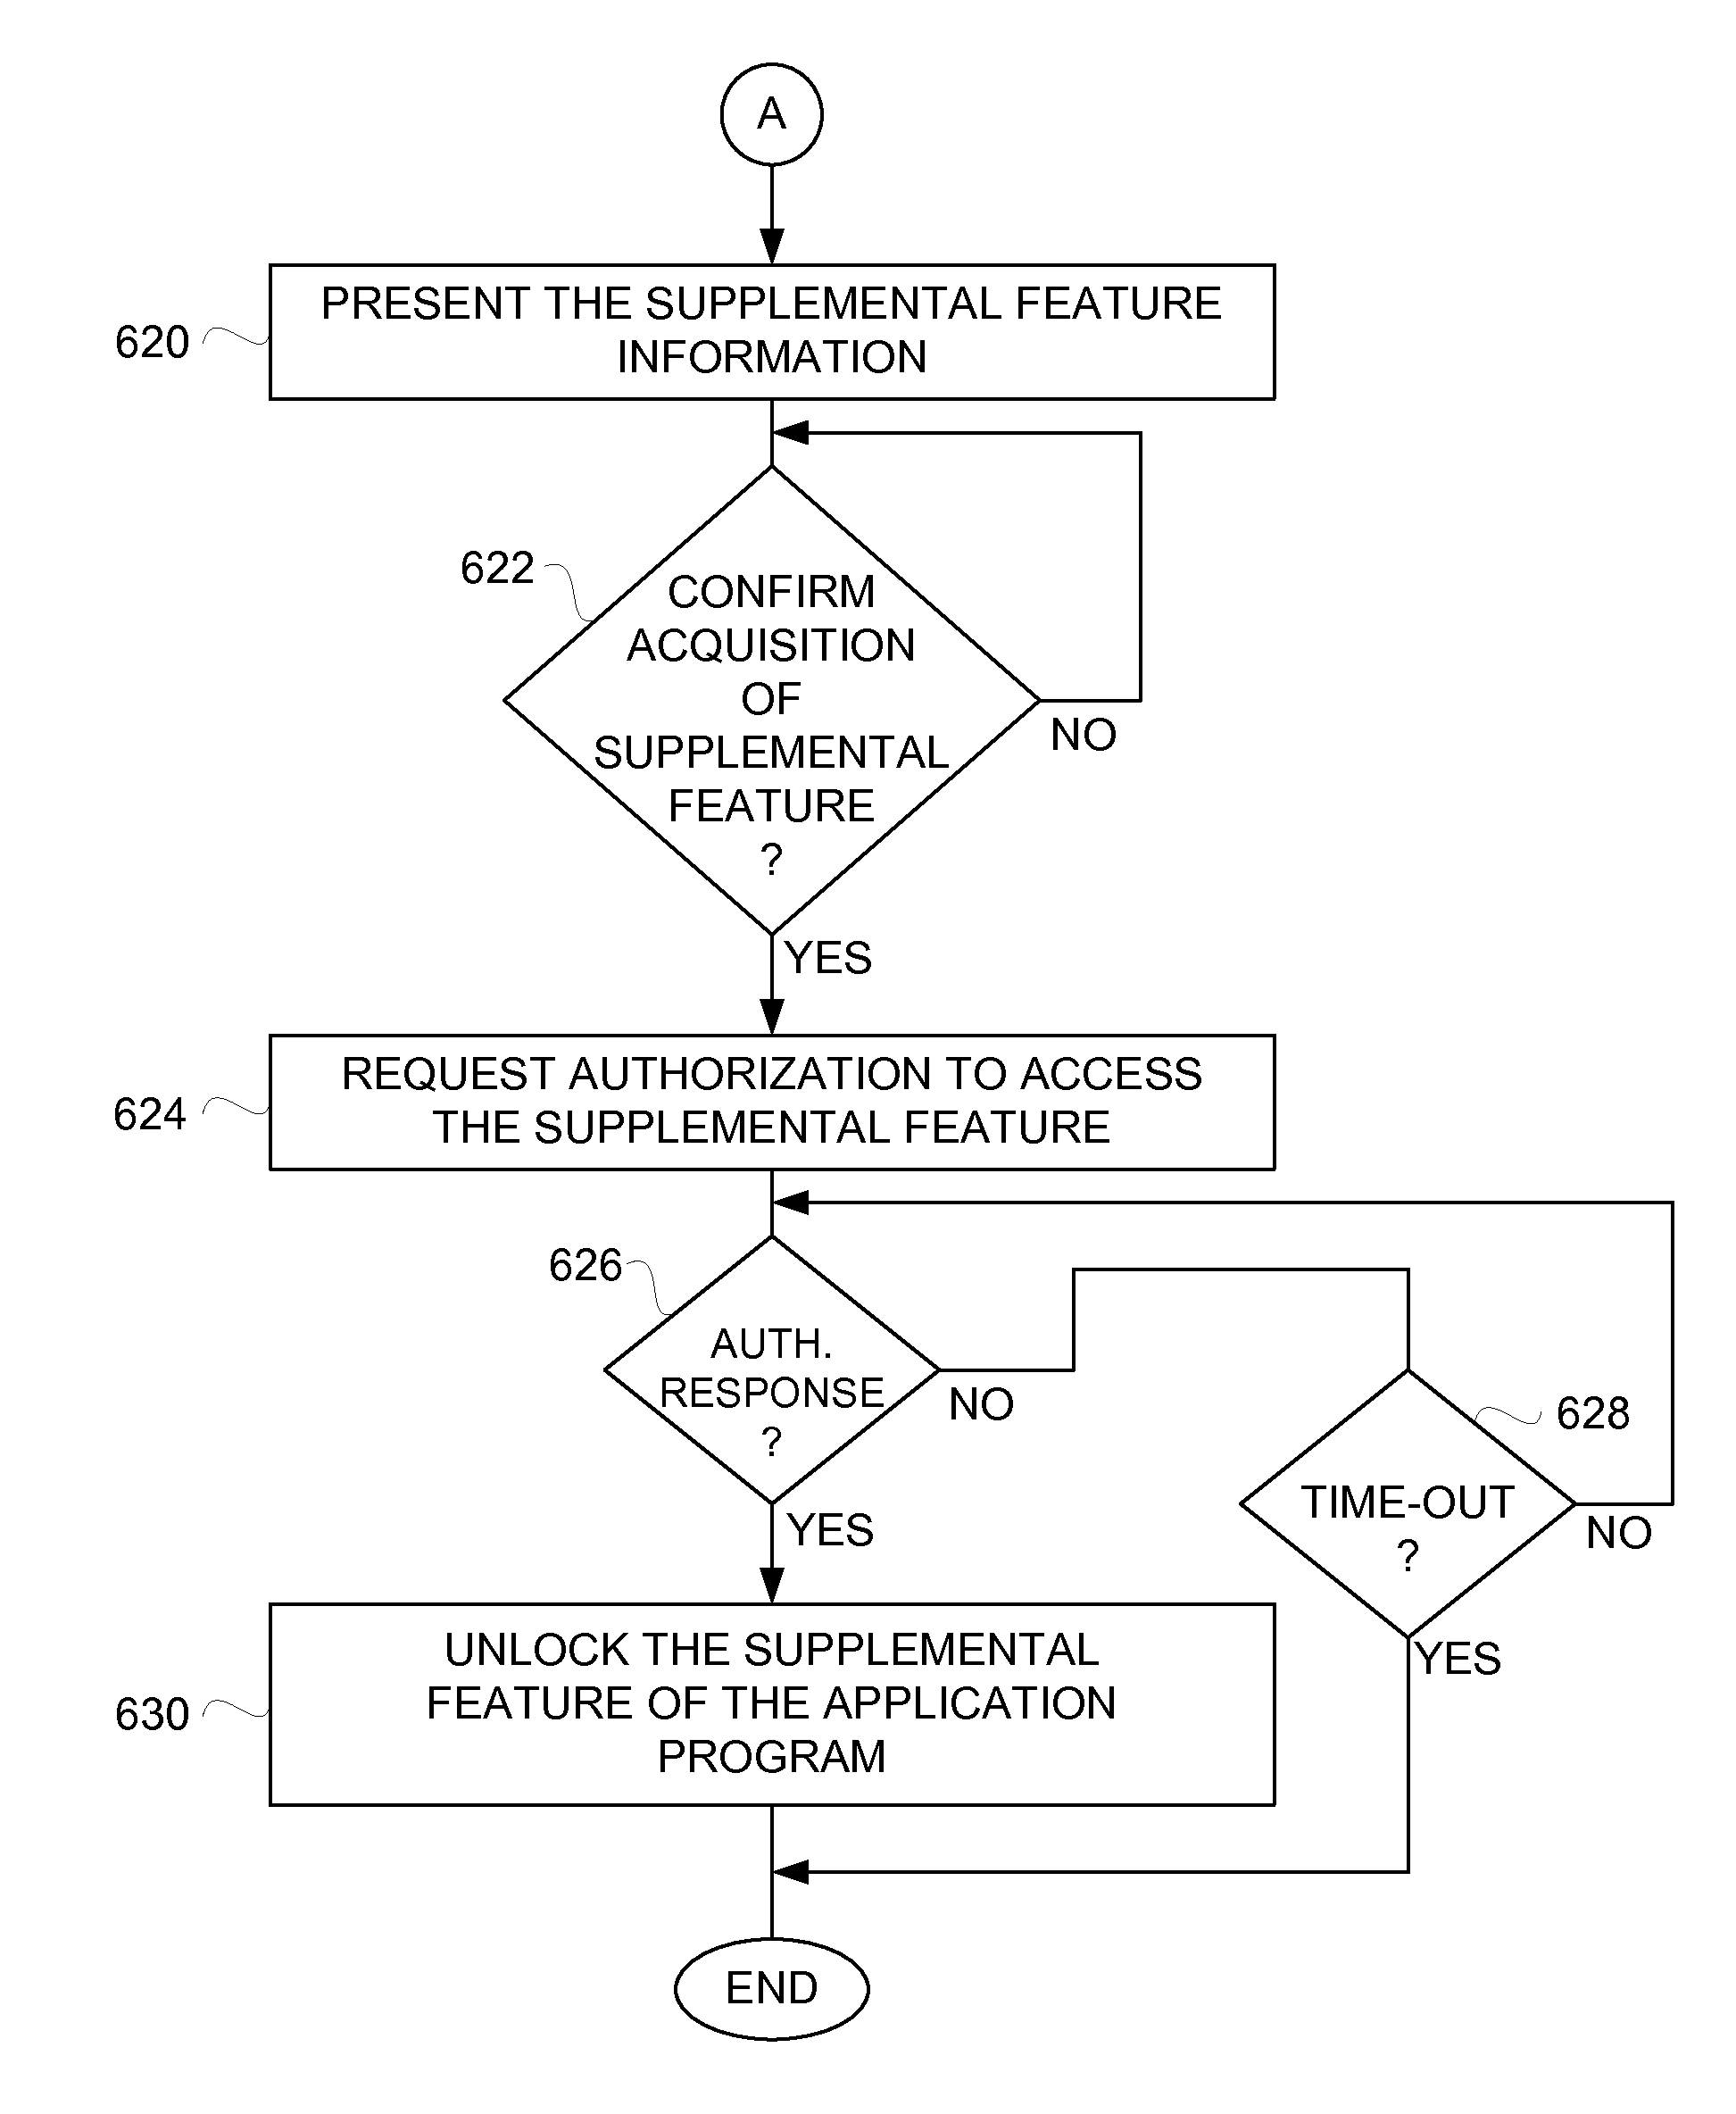 Application products with in-application subsequent feature access using network-based distribution system